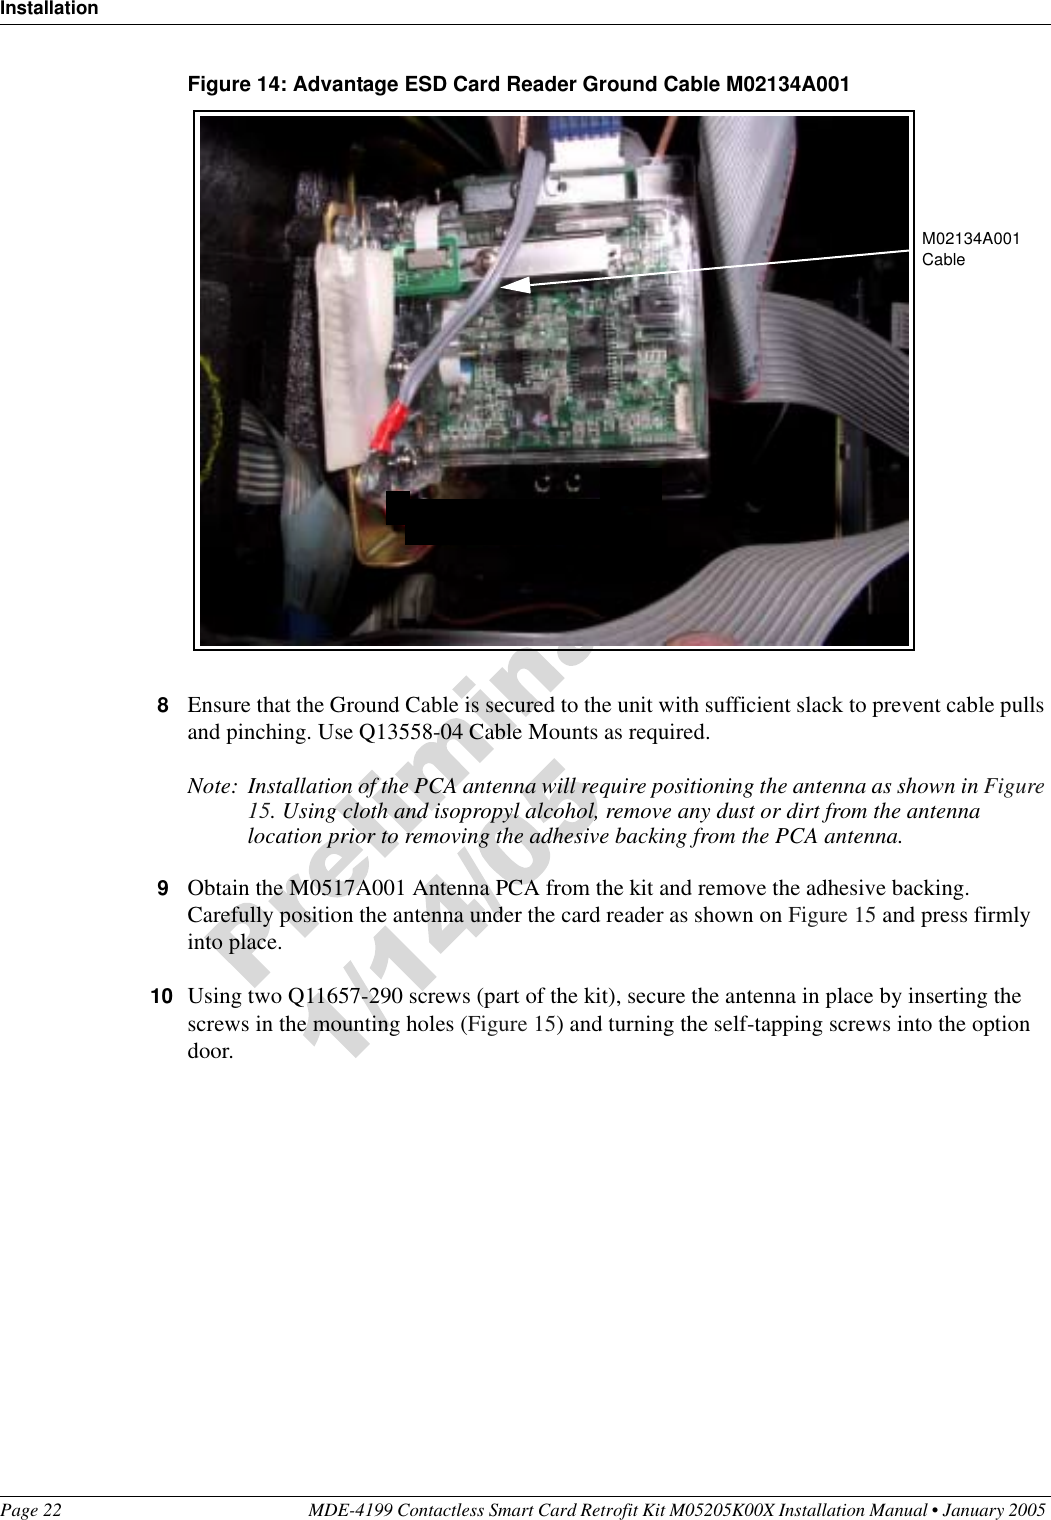 InstallationPage 22 MDE-4199 Contactless Smart Card Retrofit Kit M05205K00X Installation Manual • January 2005 Figure 14: Advantage ESD Card Reader Ground Cable M02134A0018Ensure that the Ground Cable is secured to the unit with sufficient slack to prevent cable pulls and pinching. Use Q13558-04 Cable Mounts as required.Note: Installation of the PCA antenna will require positioning the antenna as shown in Figure 15. Using cloth and isopropyl alcohol, remove any dust or dirt from the antenna location prior to removing the adhesive backing from the PCA antenna.9Obtain the M0517A001 Antenna PCA from the kit and remove the adhesive backing. Carefully position the antenna under the card reader as shown on Figure 15 and press firmly into place. 10 Using two Q11657-290 screws (part of the kit), secure the antenna in place by inserting the screws in the mounting holes (Figure 15) and turning the self-tapping screws into the option door.M02134A001 Cable